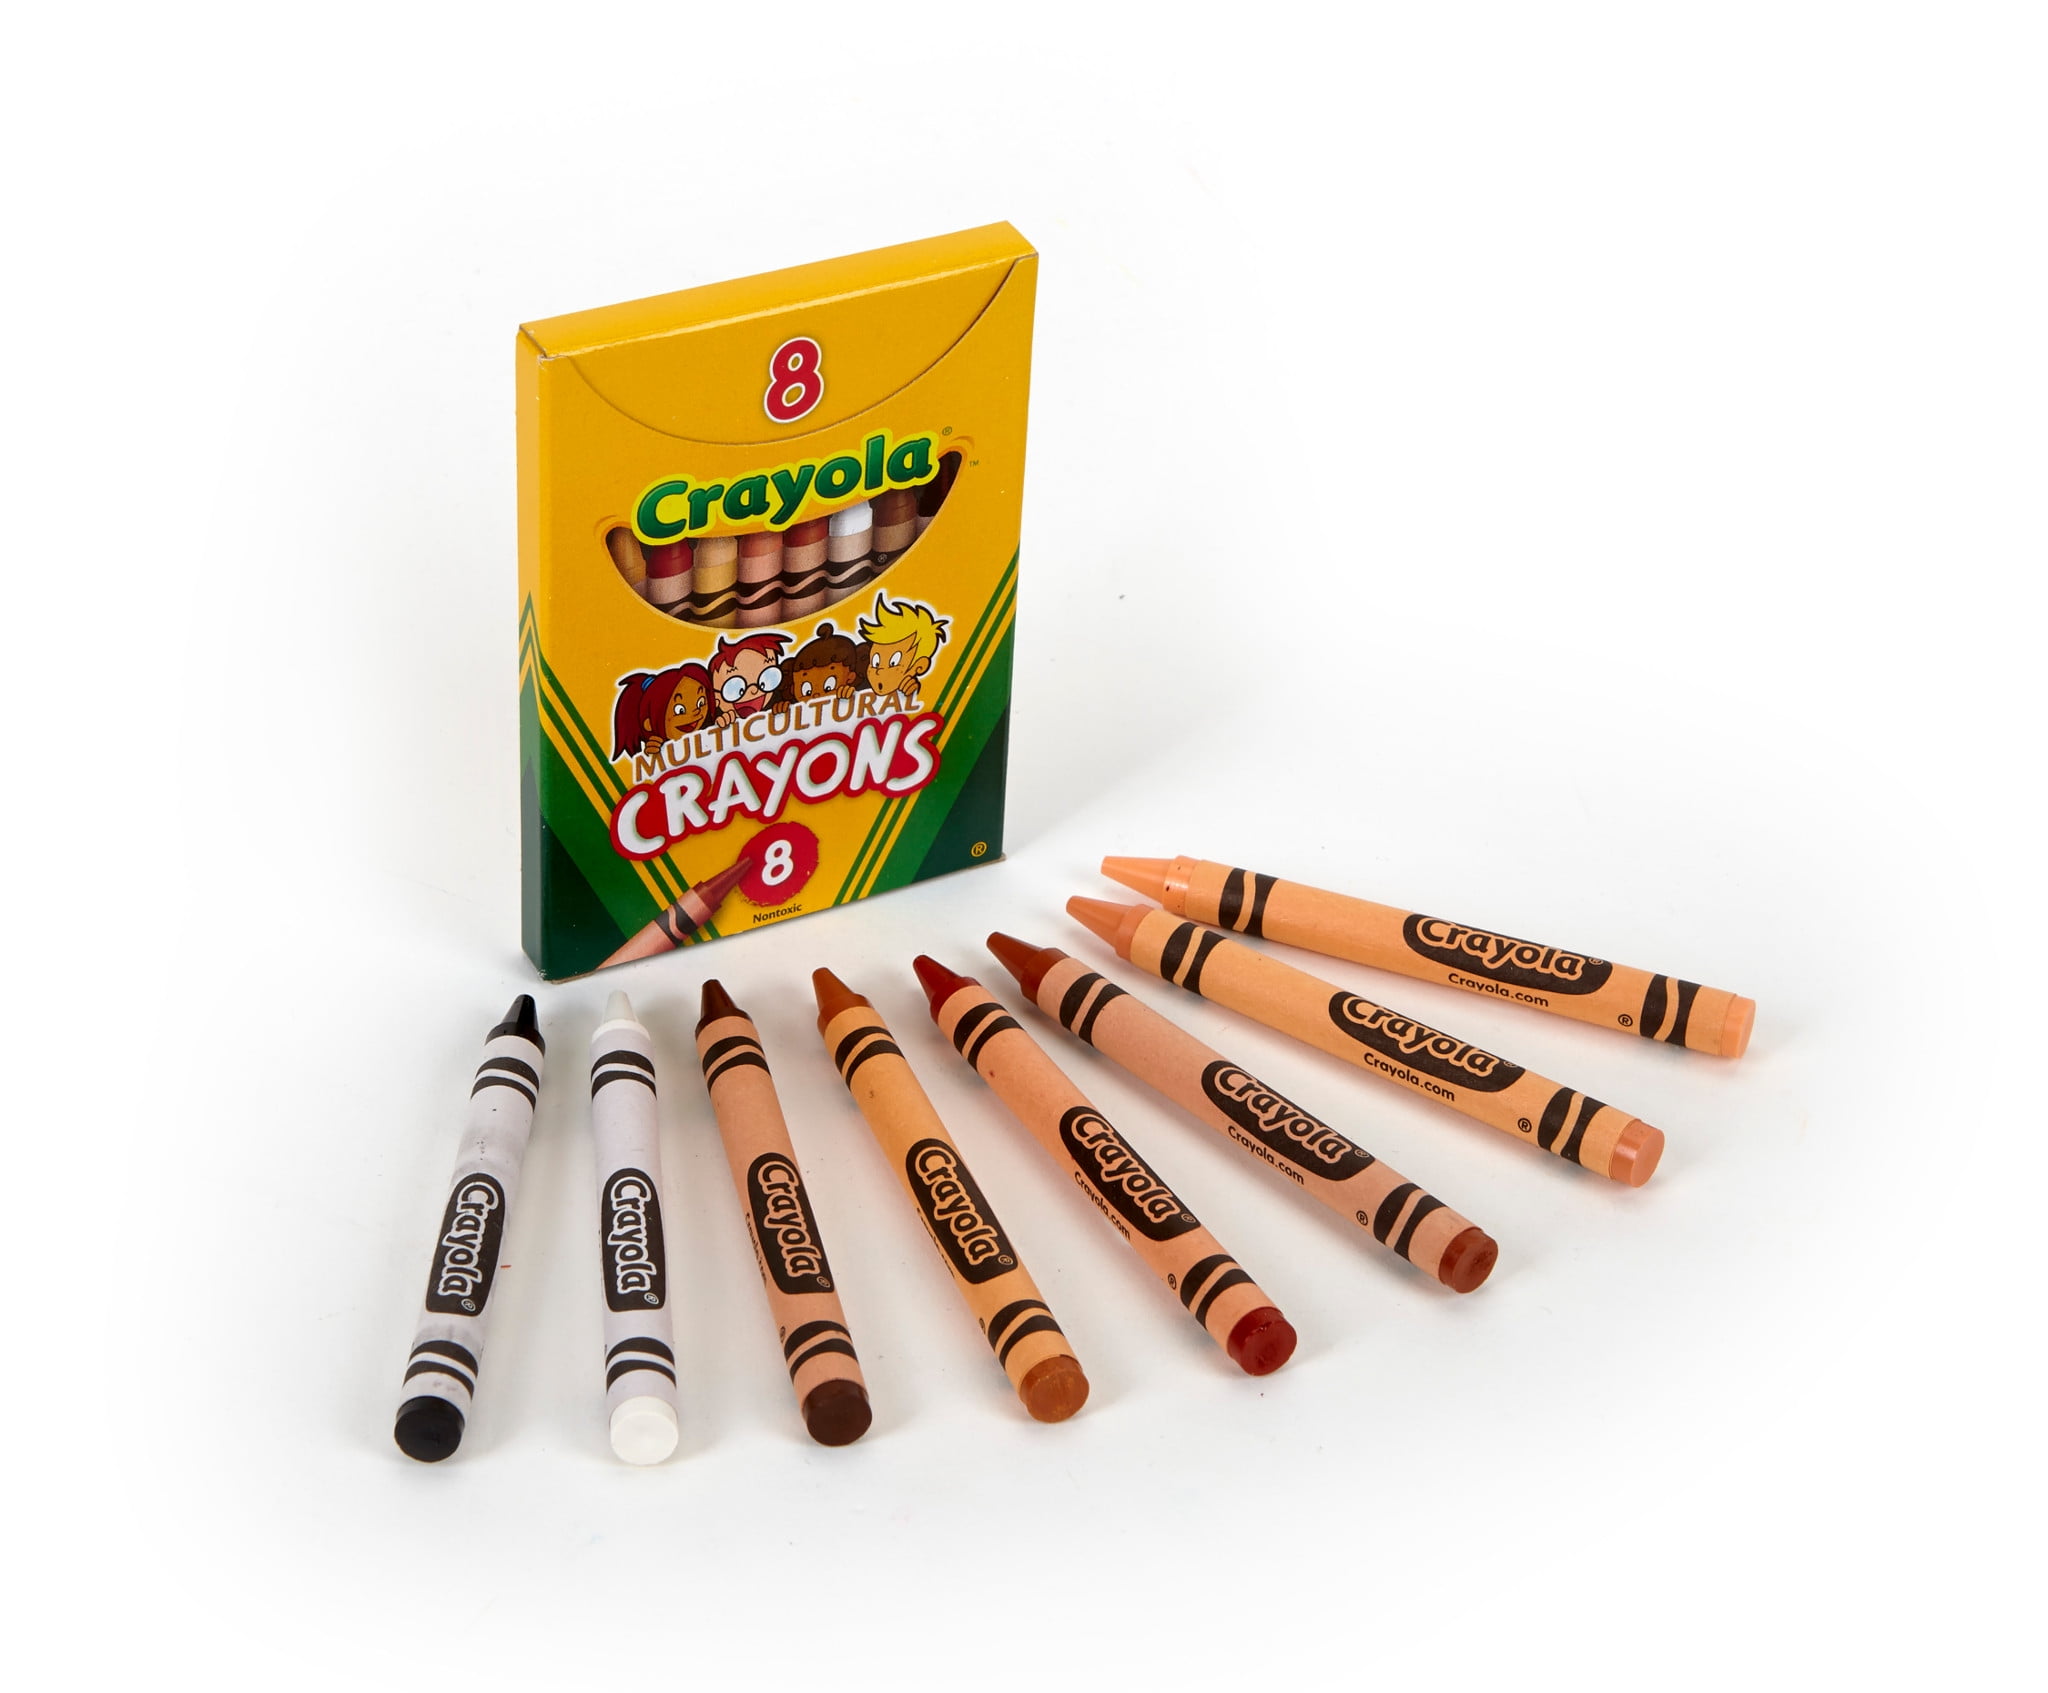 Crayola Multi-Cultural Crayons 7/16 x 4 Inches Pack of 8 Assorted Skin Tone Colors Large 